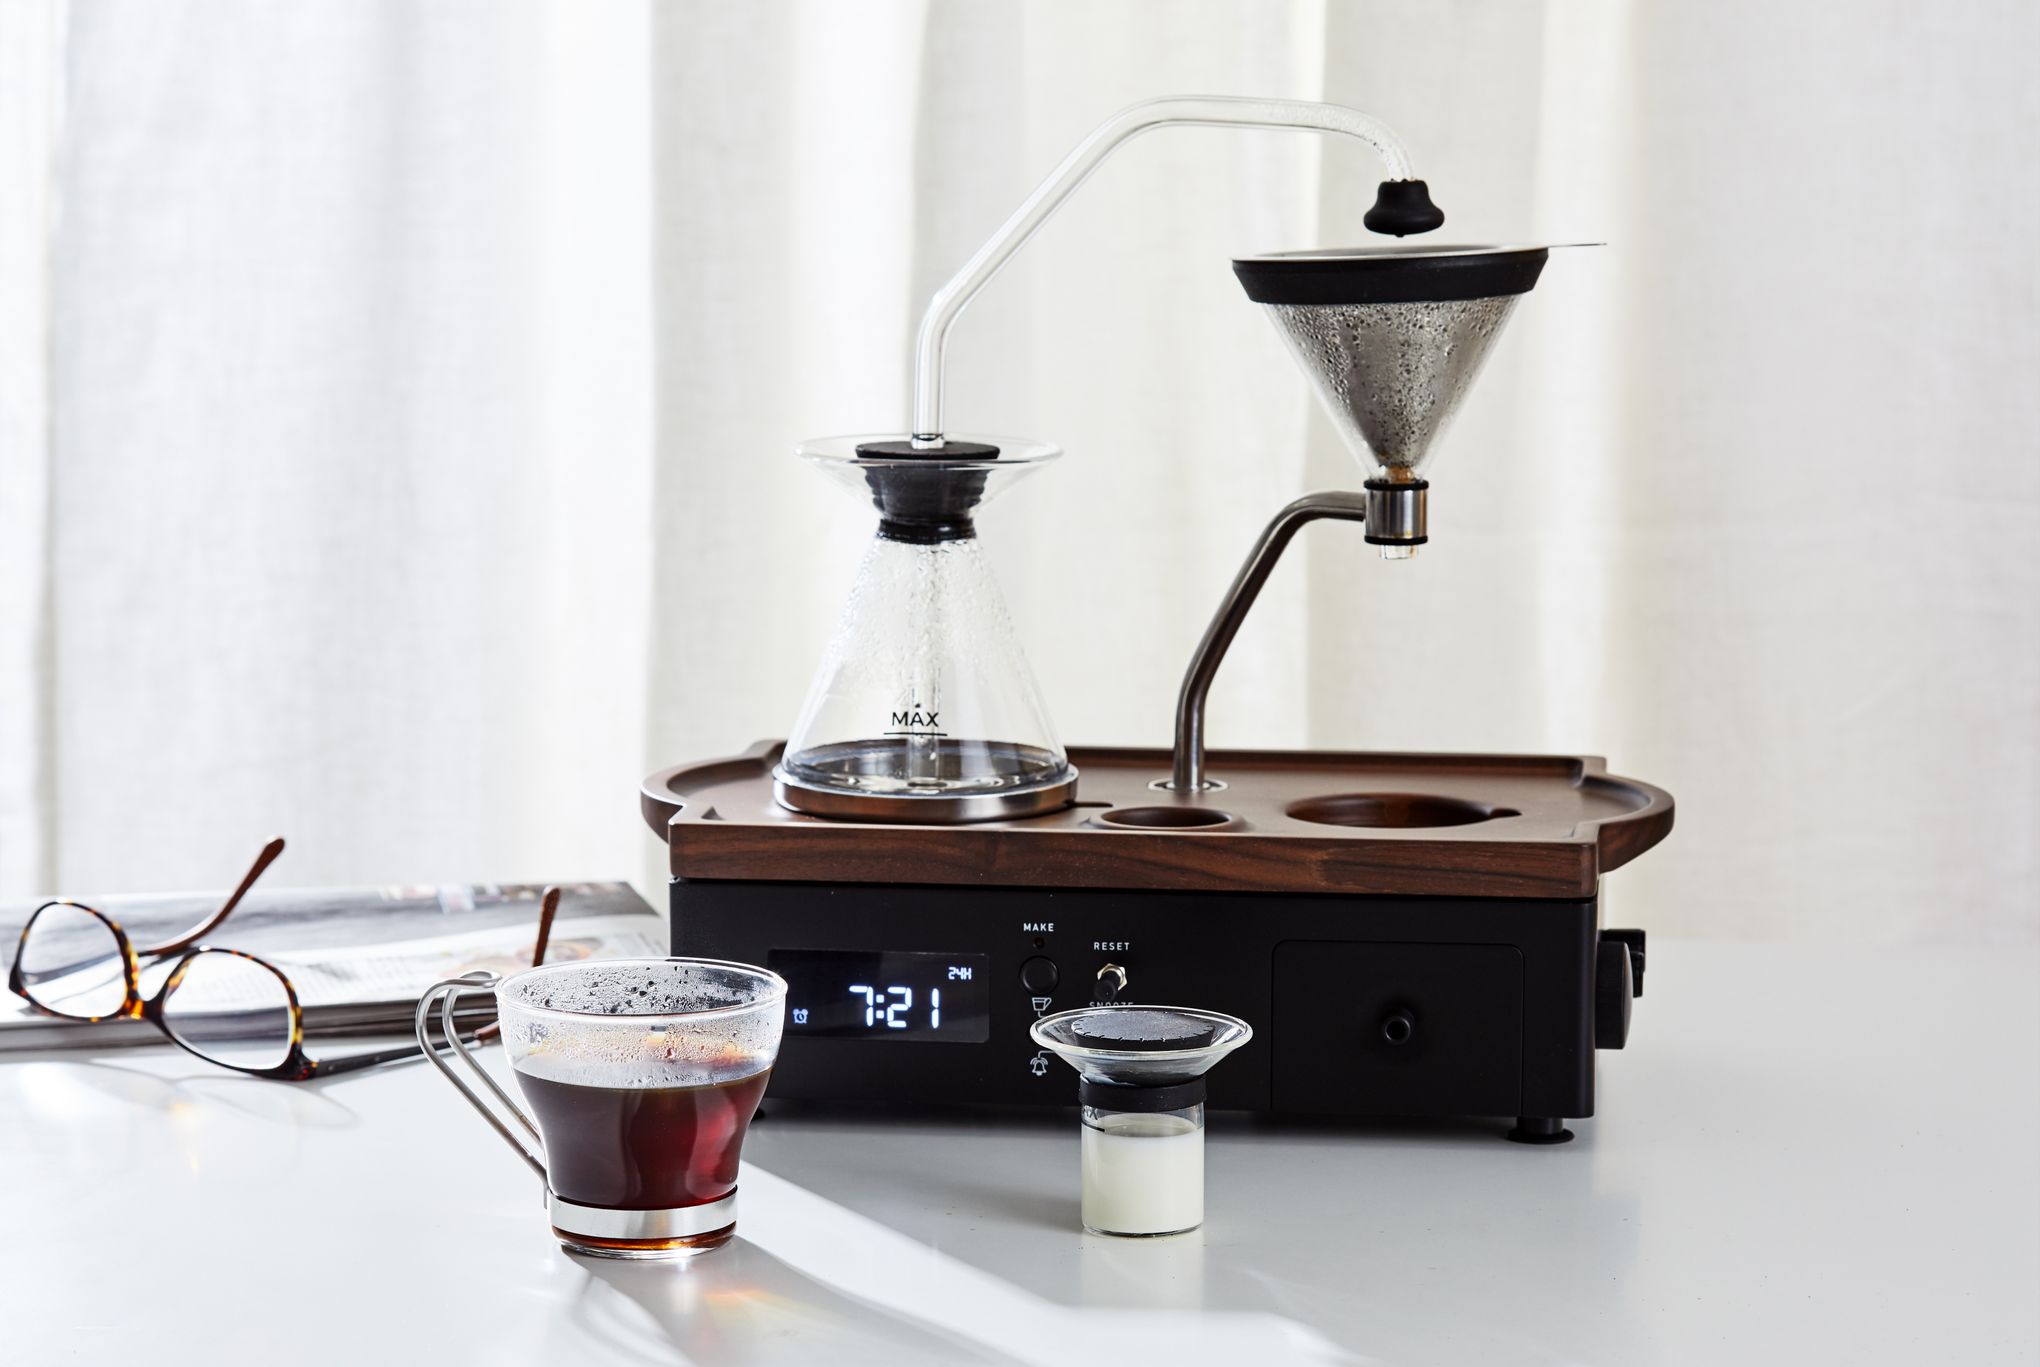 Can a $445 bedside coffee maker deliver both convenience and quality?